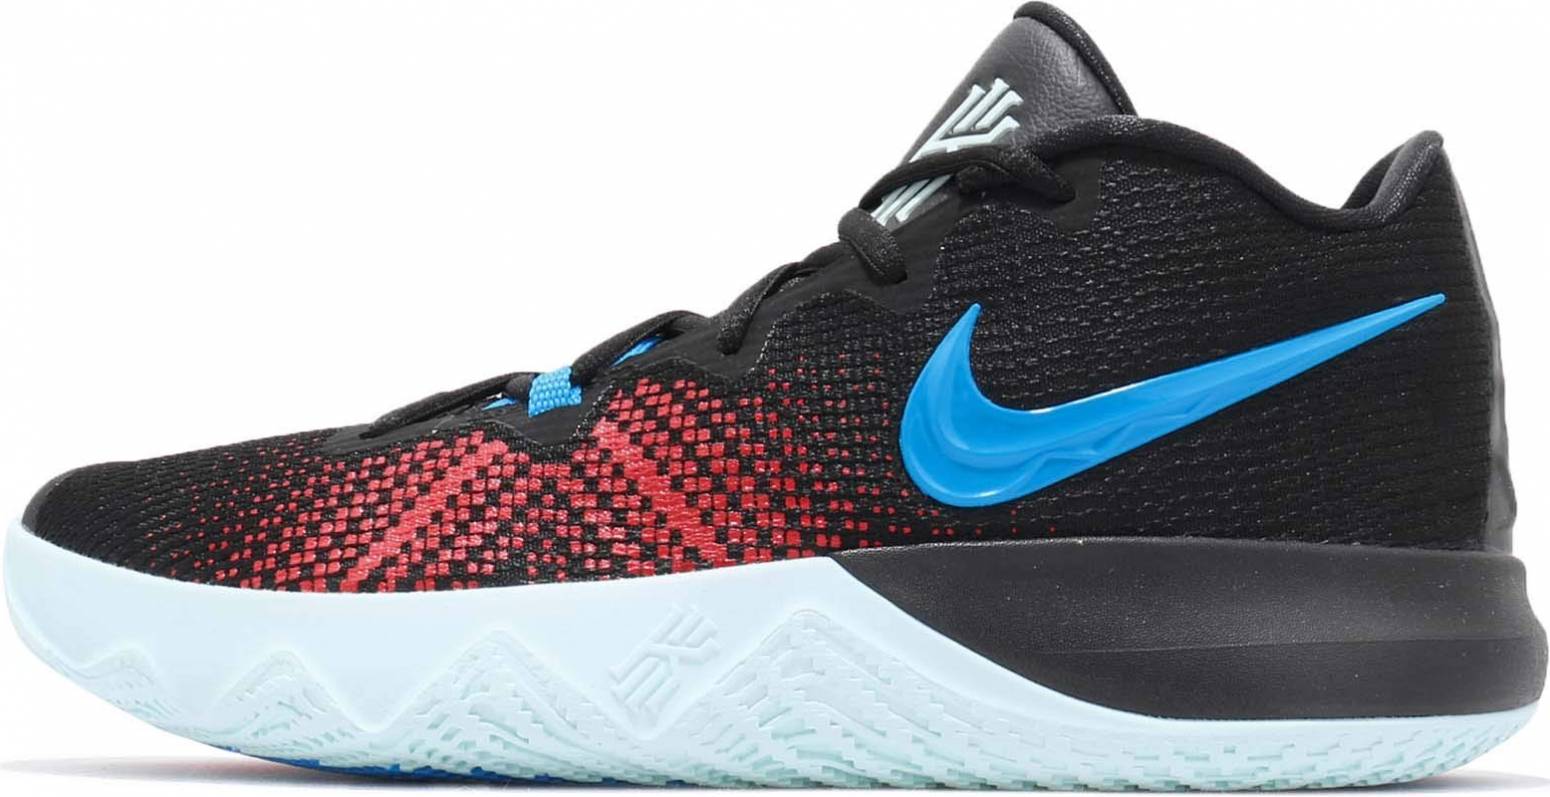 Only £63 + Review of Nike Kyrie Flytrap 